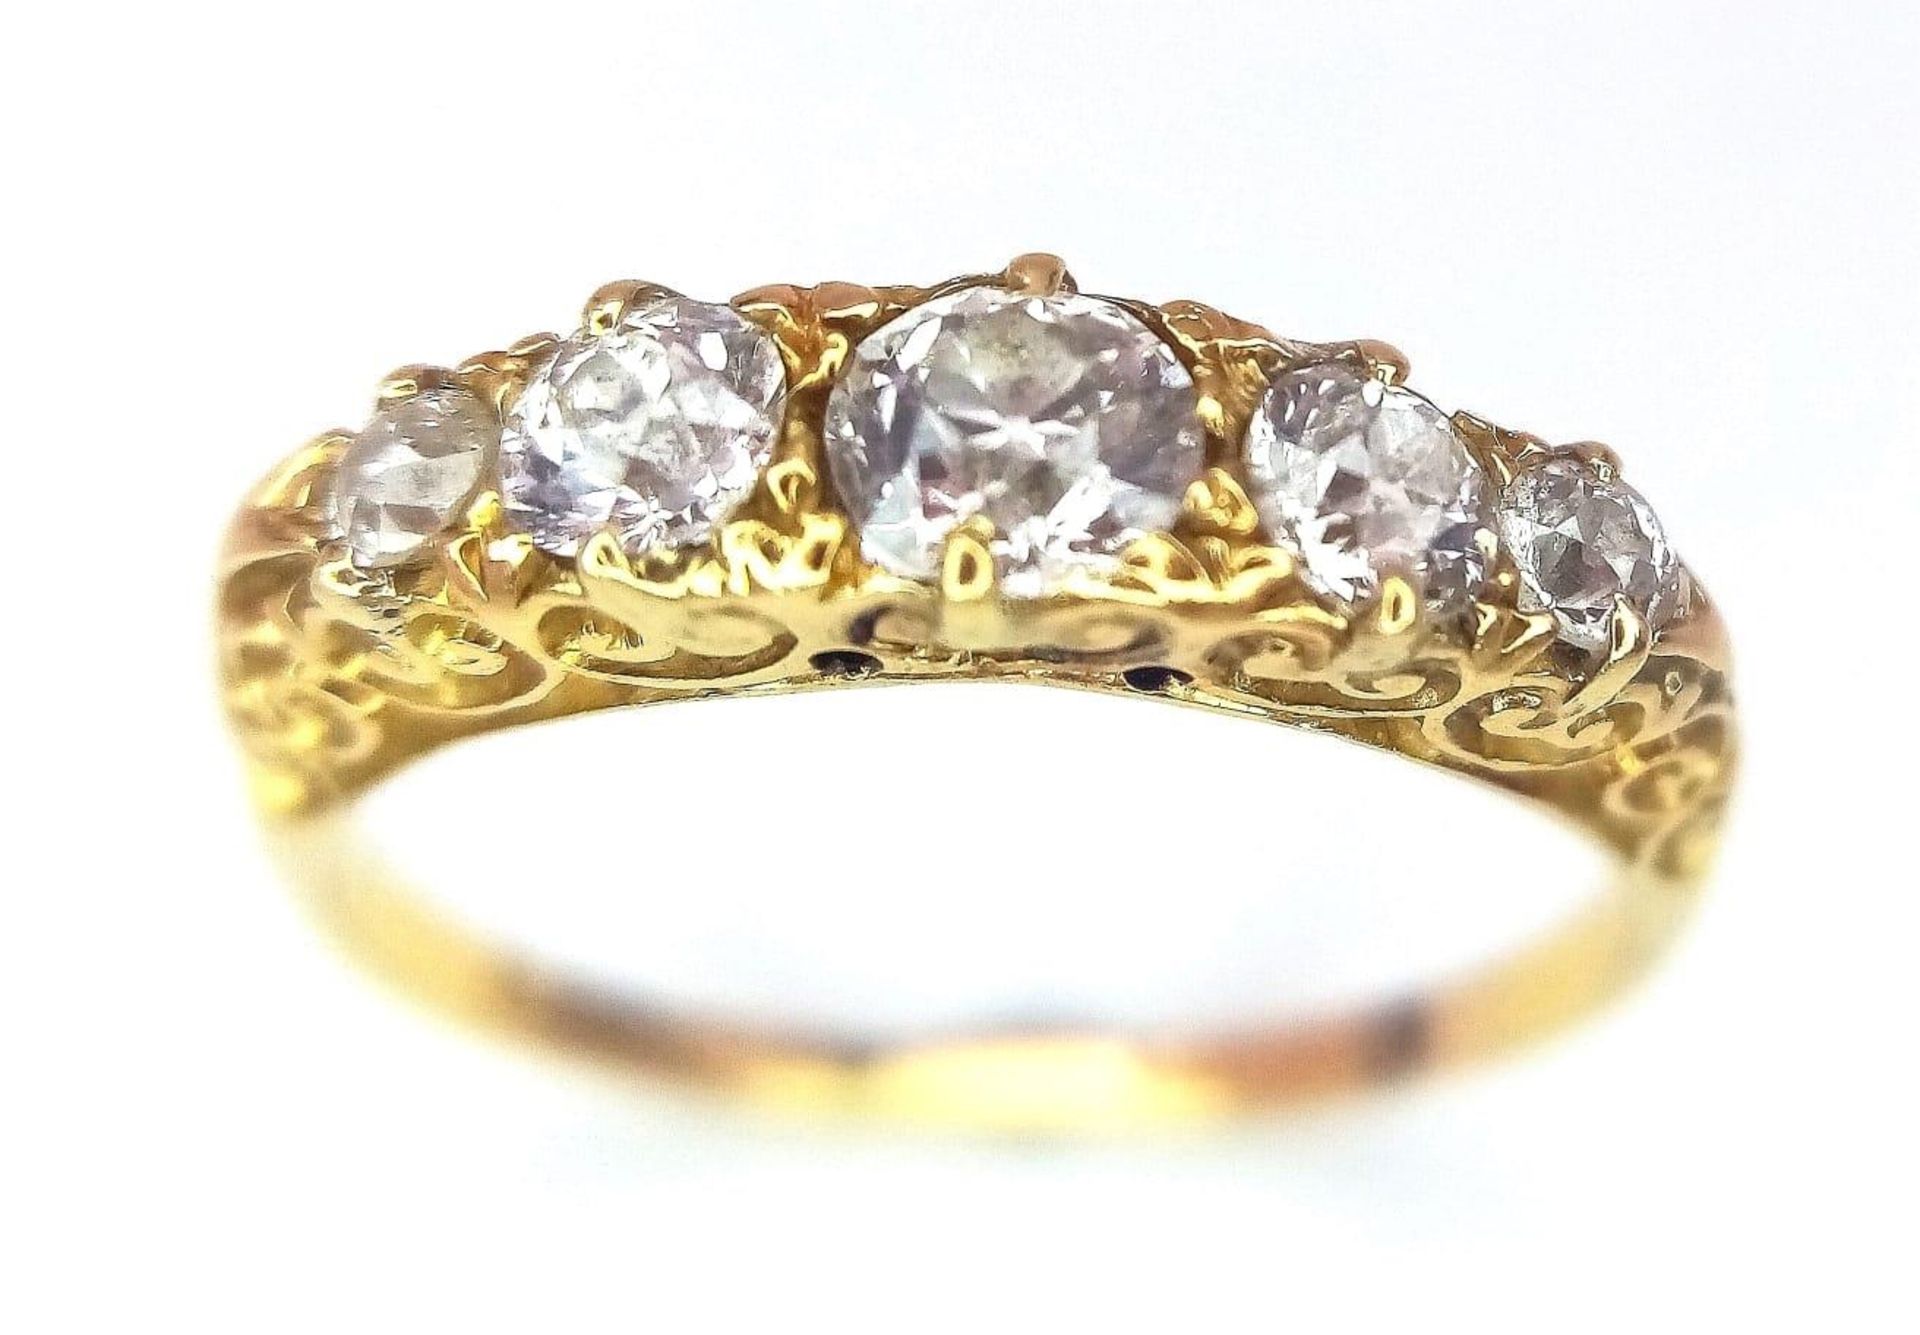 AN ANTIQUE 18K YELOW GOLD DIAMOND 5 STONE SET RING, WITH APPROX 0.60CT OLD CUT DIAMONDS, WEIGHT 2.5G - Image 4 of 13